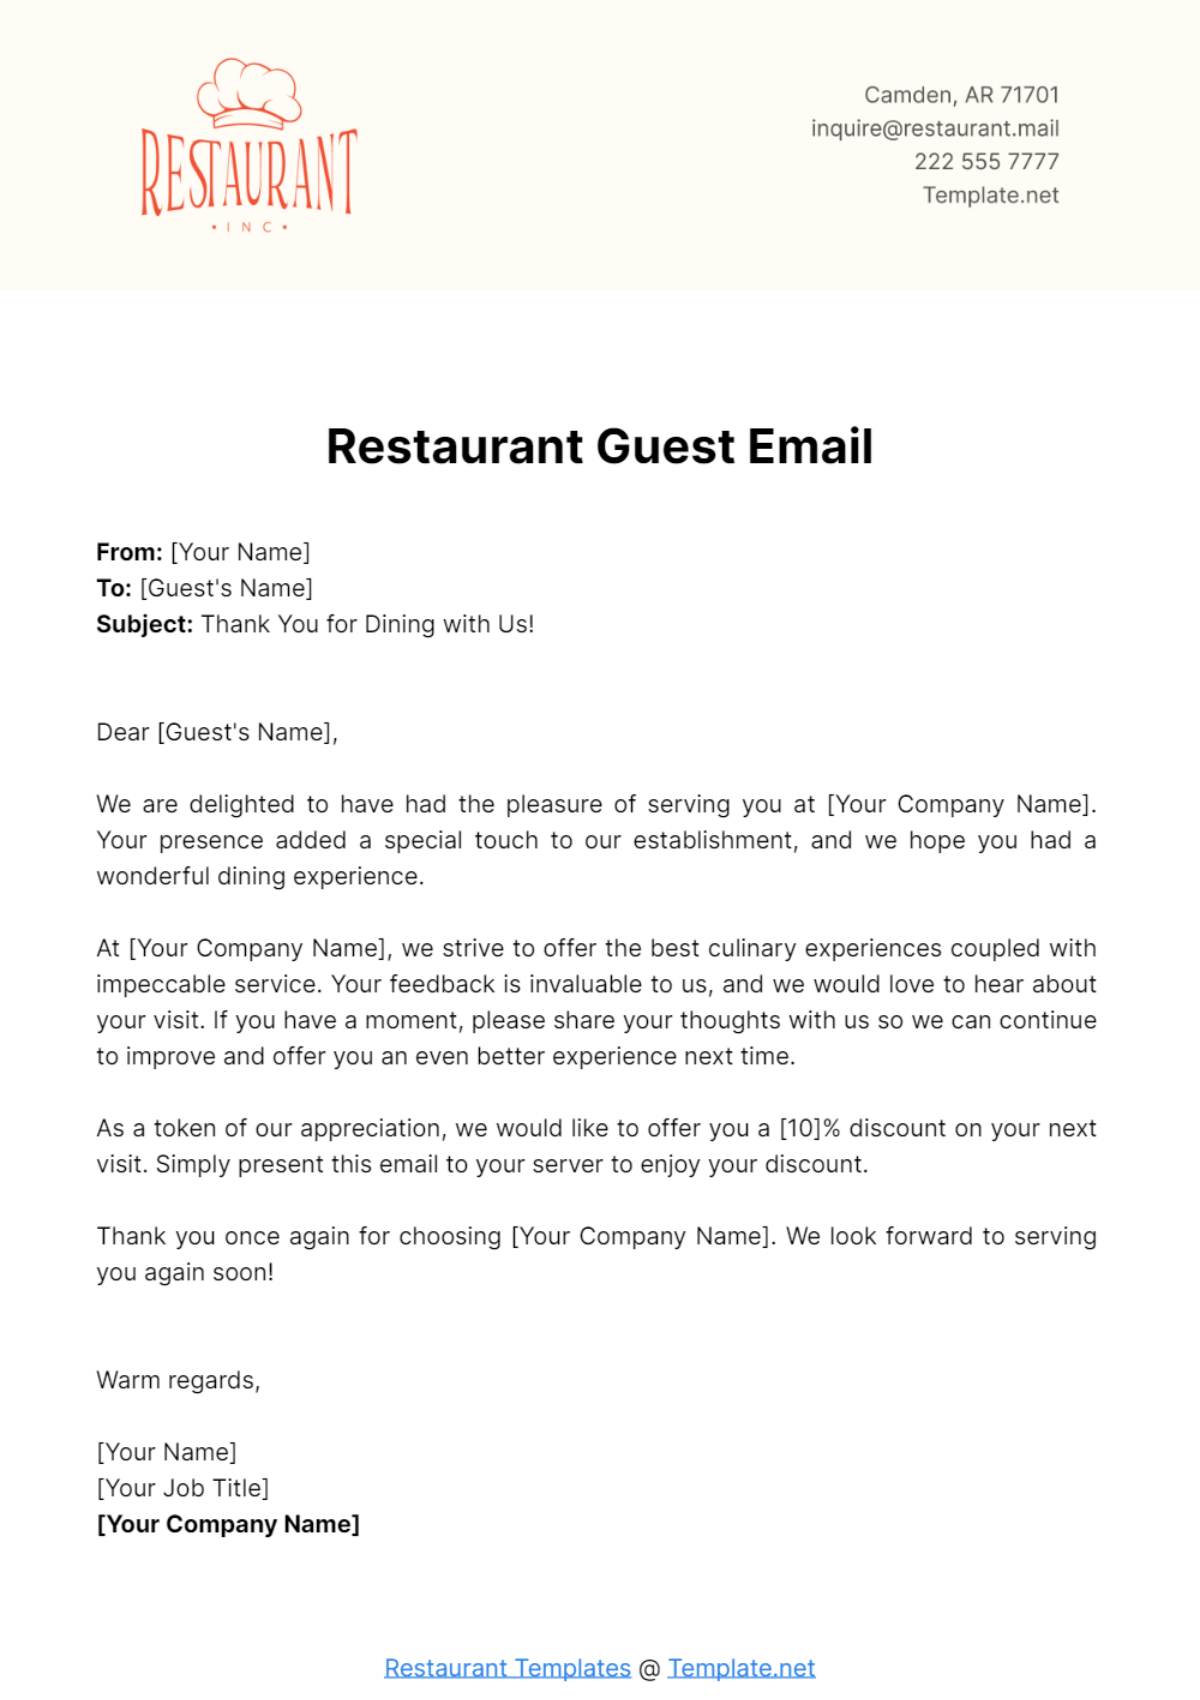 Free Restaurant Guest Email Template